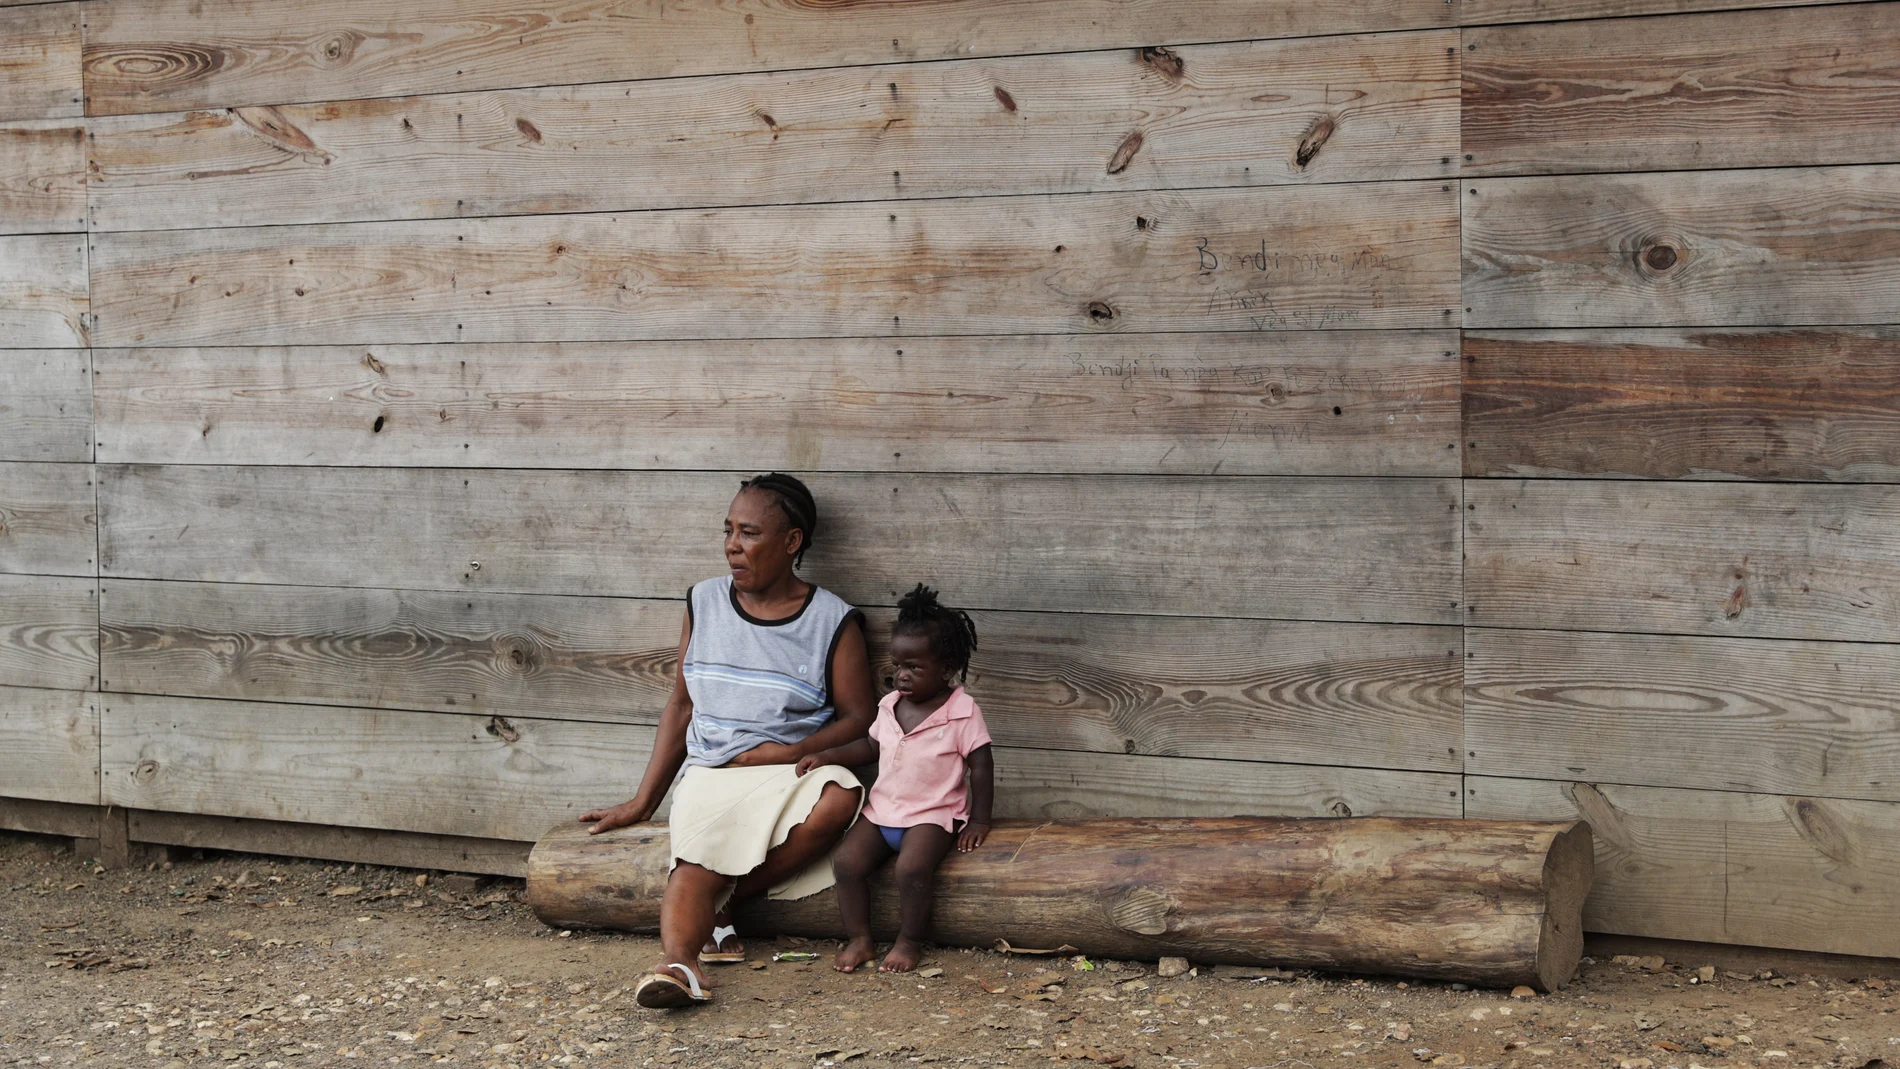 Duperat Laurette sits on a log with a girl at the entrance of a migrant shelter in Lajas Blancas, Darien province, Panama, Saturday, Aug. 29, 2020. The 45-year-old Haitian migrant and her husband emerged from the thick jungle that blankets the Panama-Colombia border here in Darien seven months earlier and have advanced no farther because of the new coronavirus pandemic. (AP Photo/Arnulfo Franco)